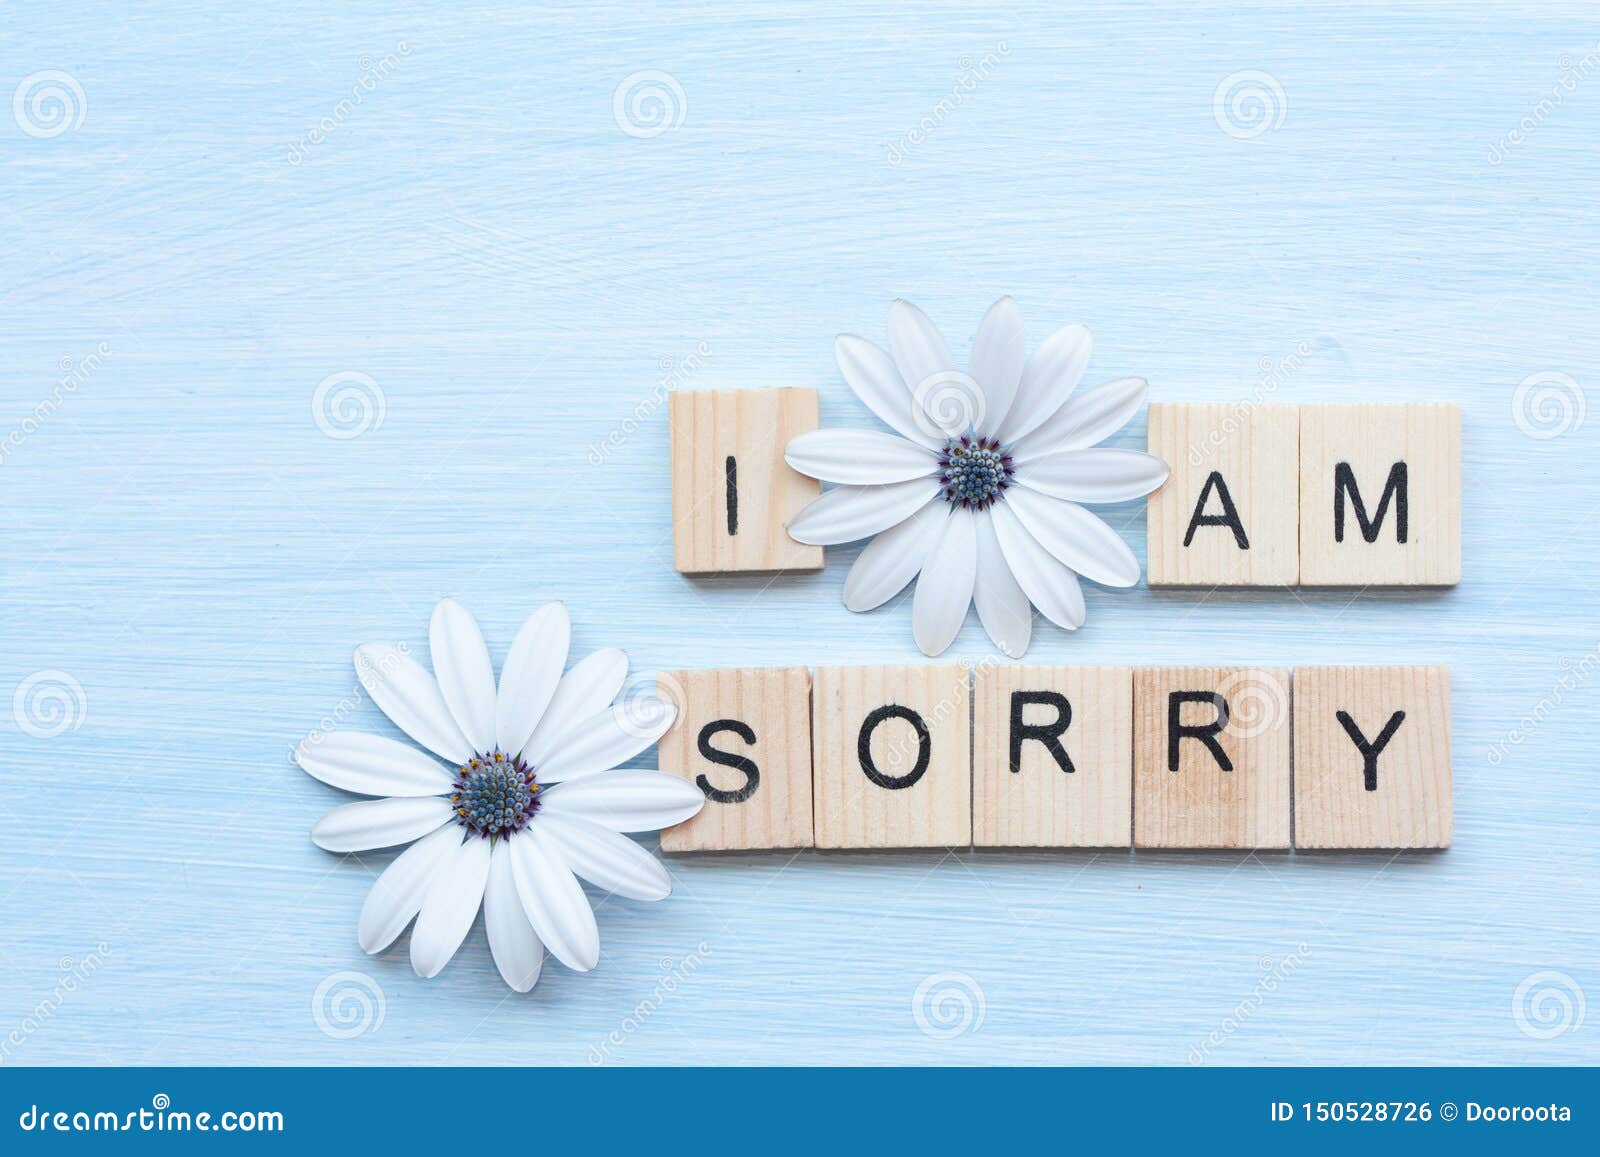 I Am Sorry Text And Flowers Stock Photo Image Of Sorry Flowers 150528726